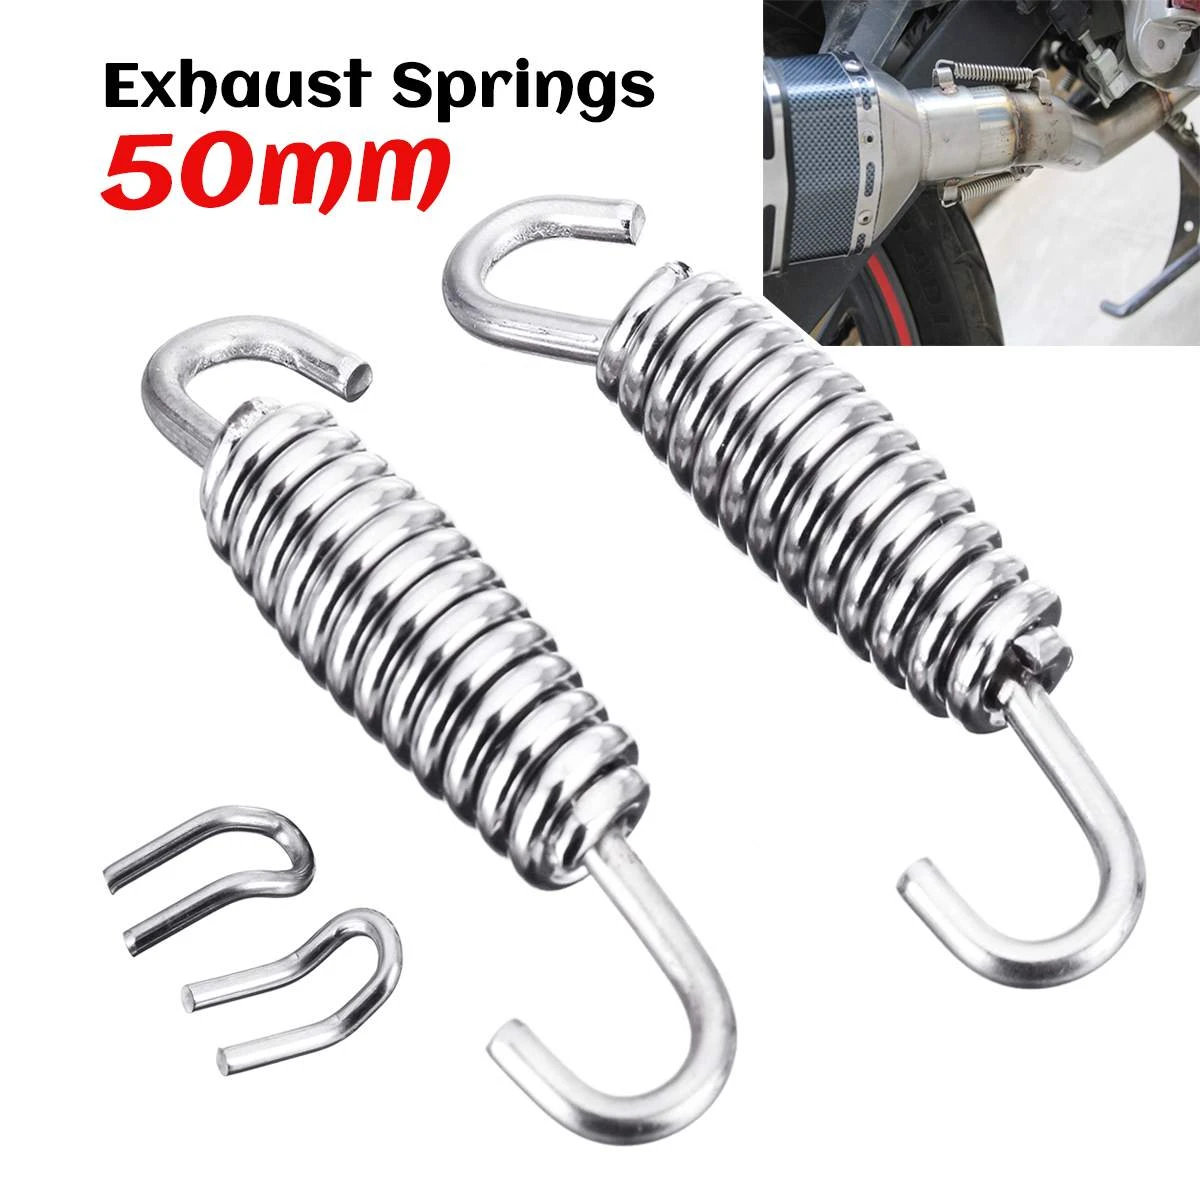 2 Pcs 64mm Short Hook Tension Spring For Motorcycle Exhaust Pipe Stainless Steel 